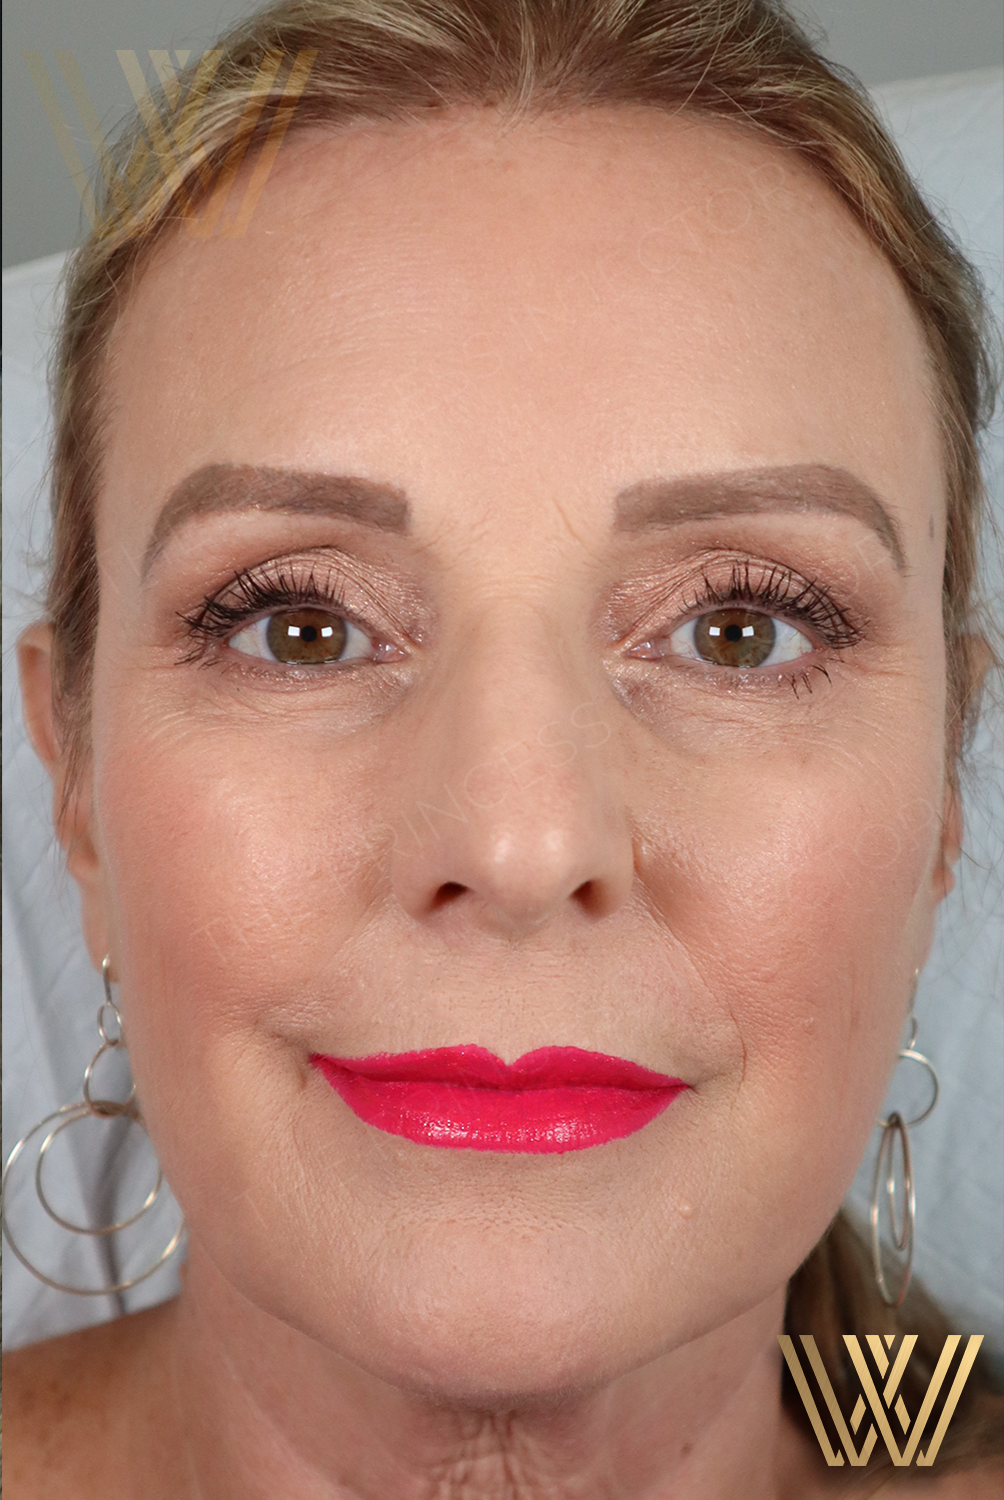 Stunning transformation of a middle-aged woman looking 10 years younger after Sculptra treatment by Windermere's experienced Princess Injectors in Orlando, FL.